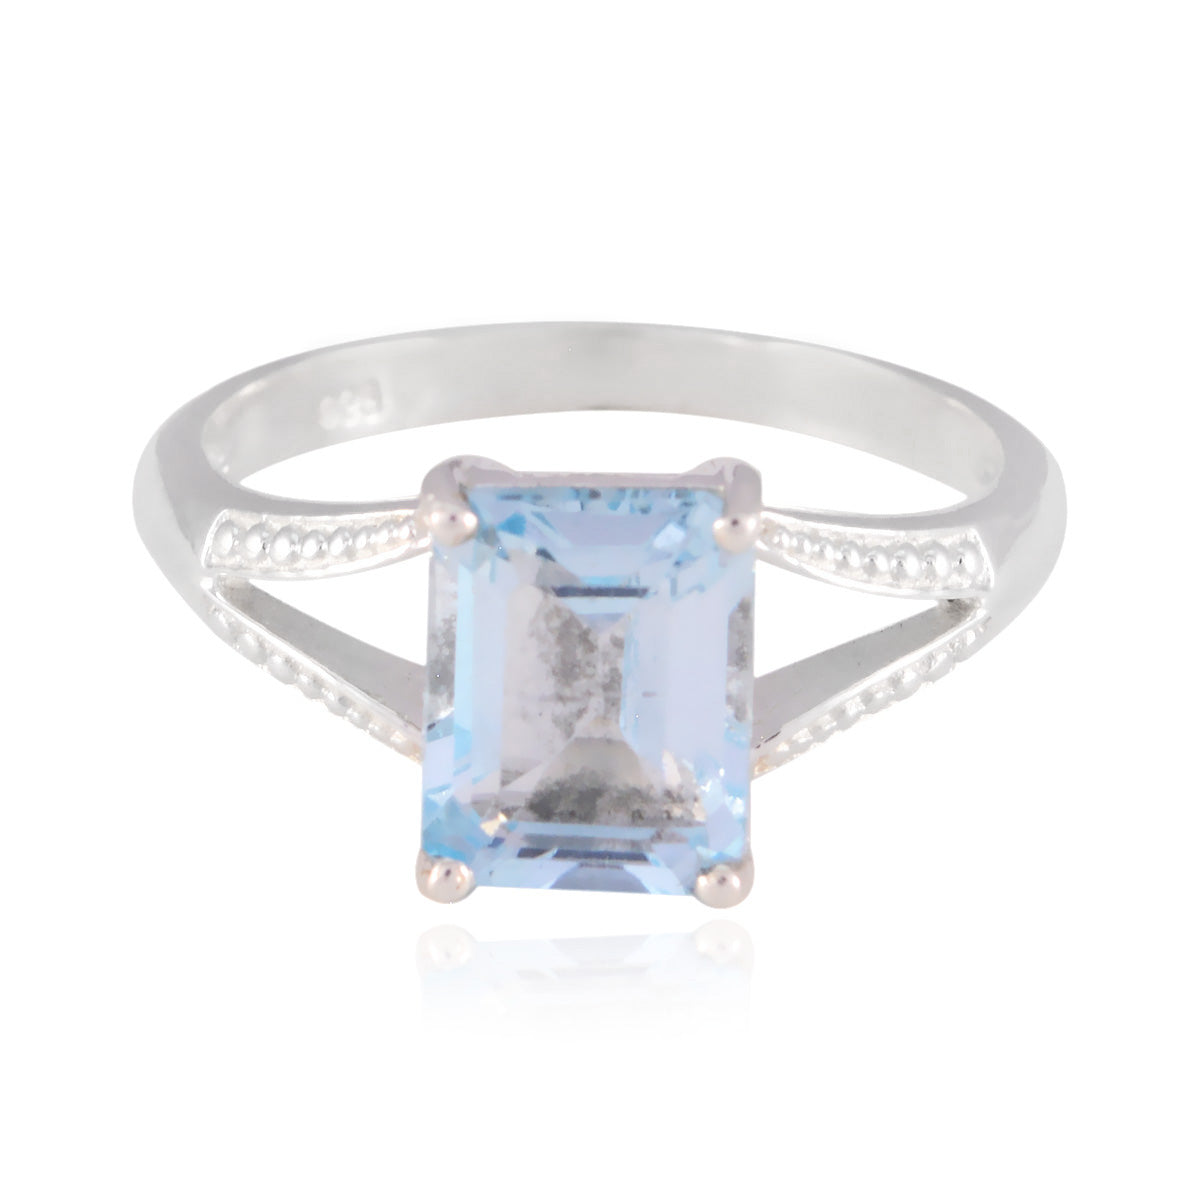 Reals Gemstones Blue Topaz 925 Silver Ring Jewelry Stores Online